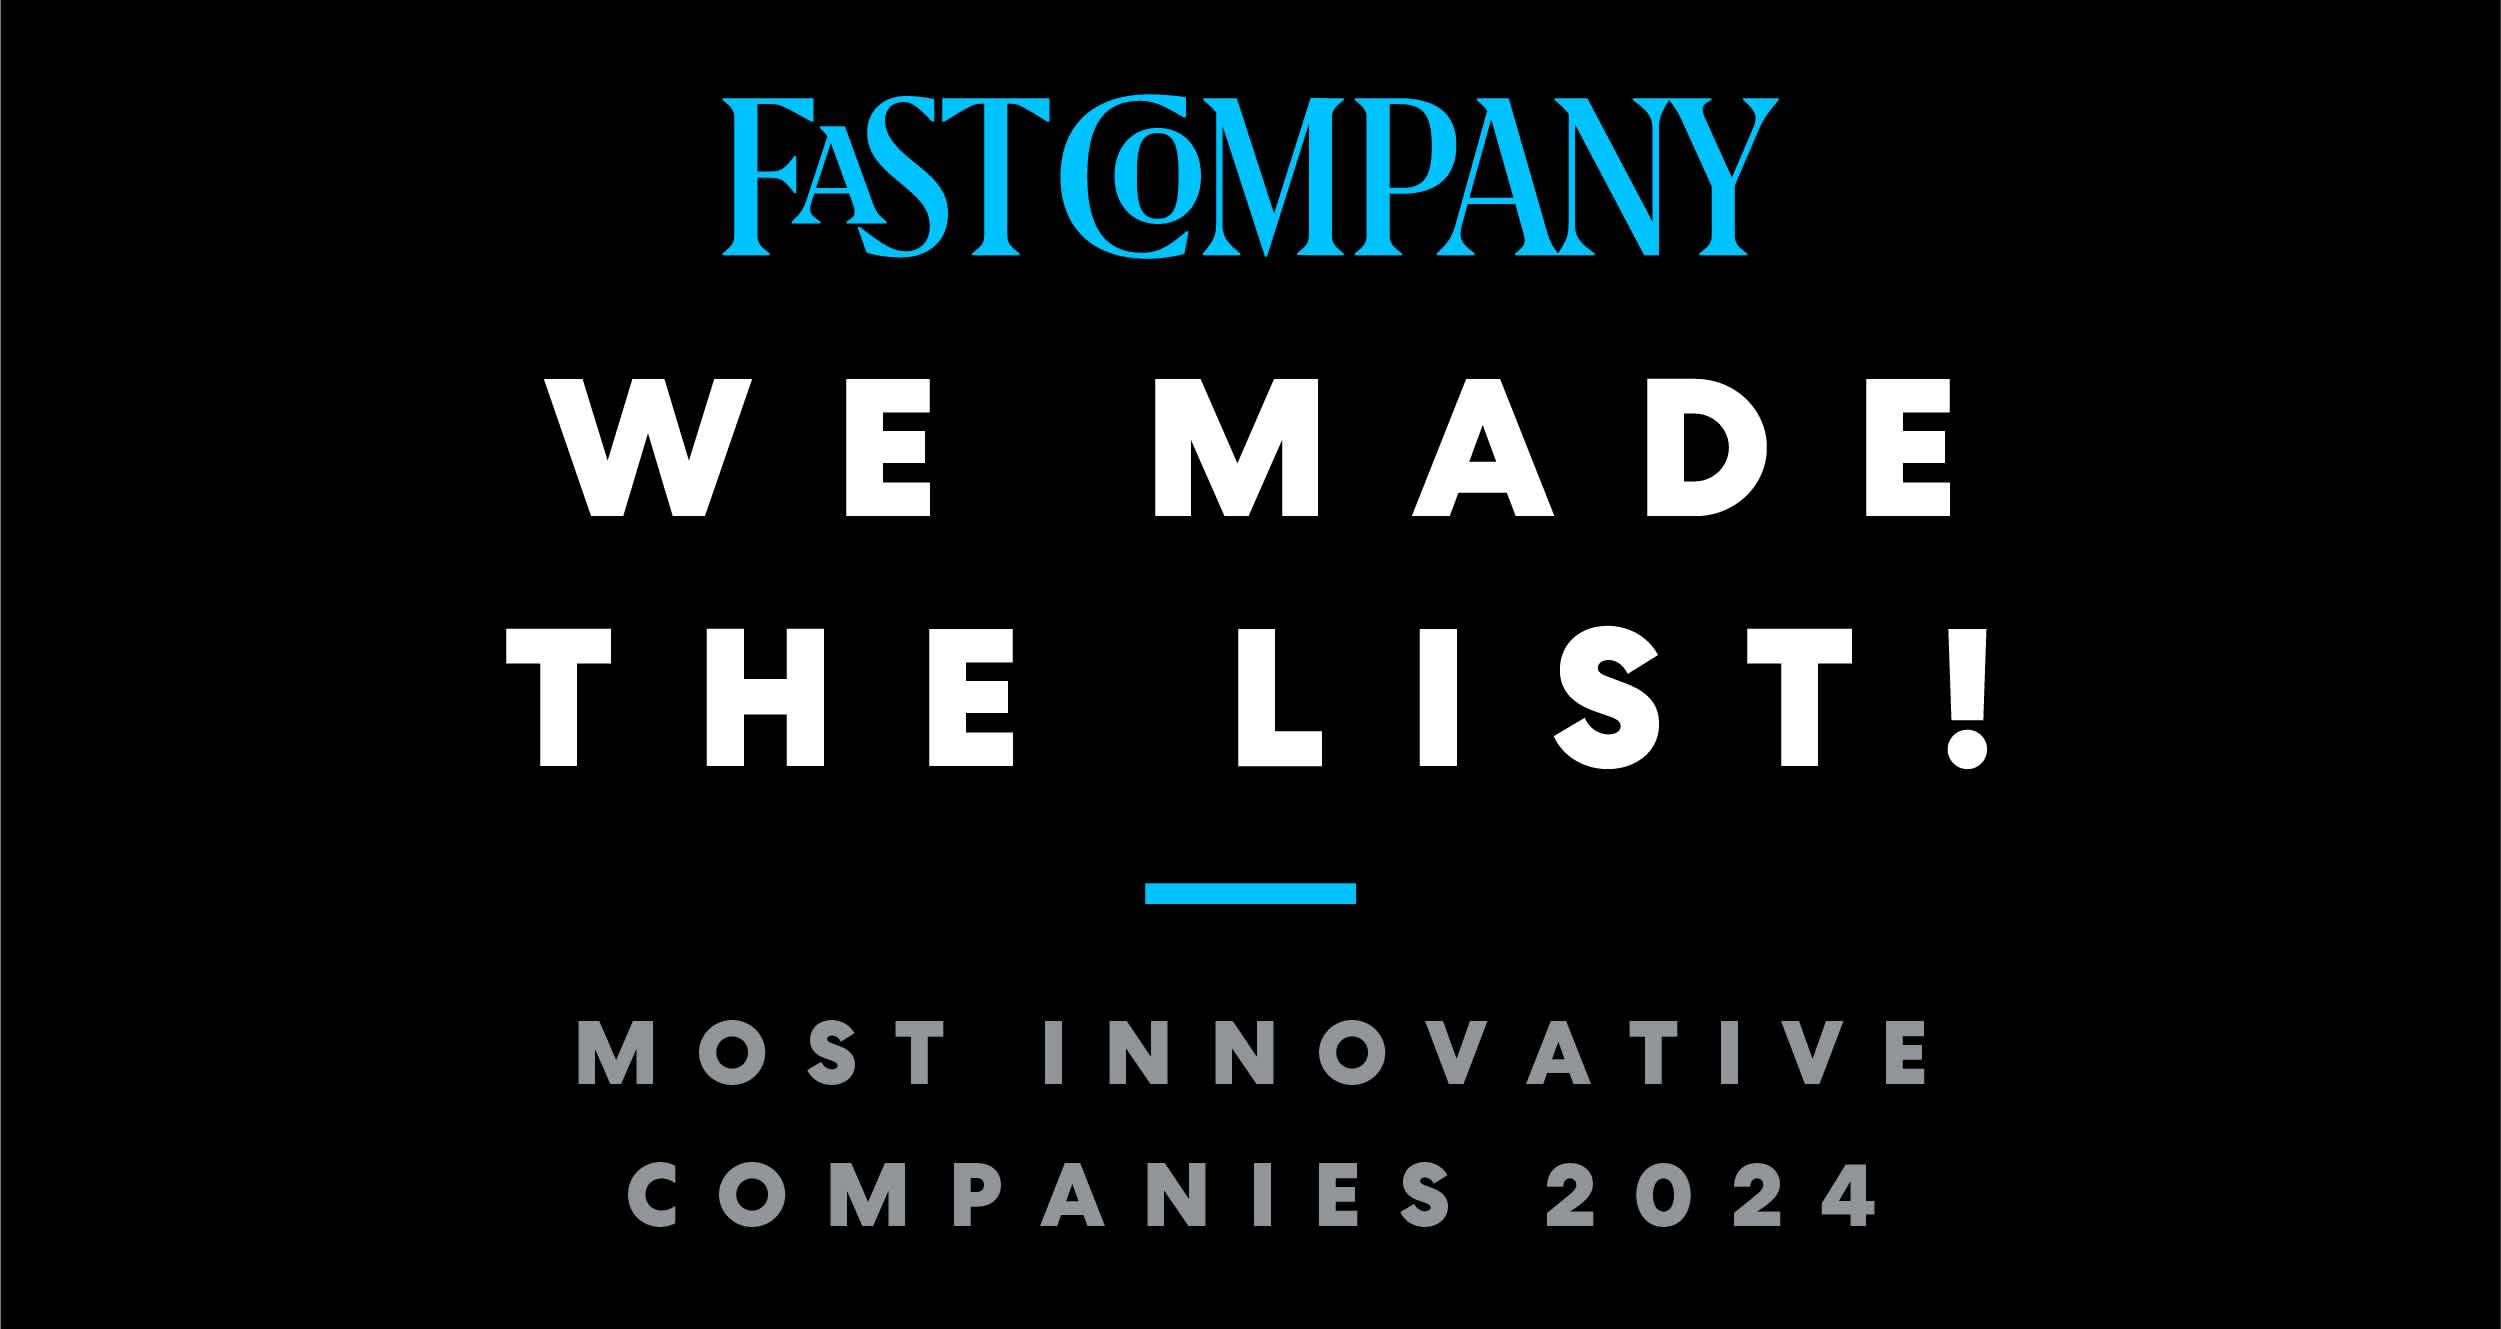 KFC Named to Fast Company’s Annual List of the World’s Most Innovative Companies of 2024